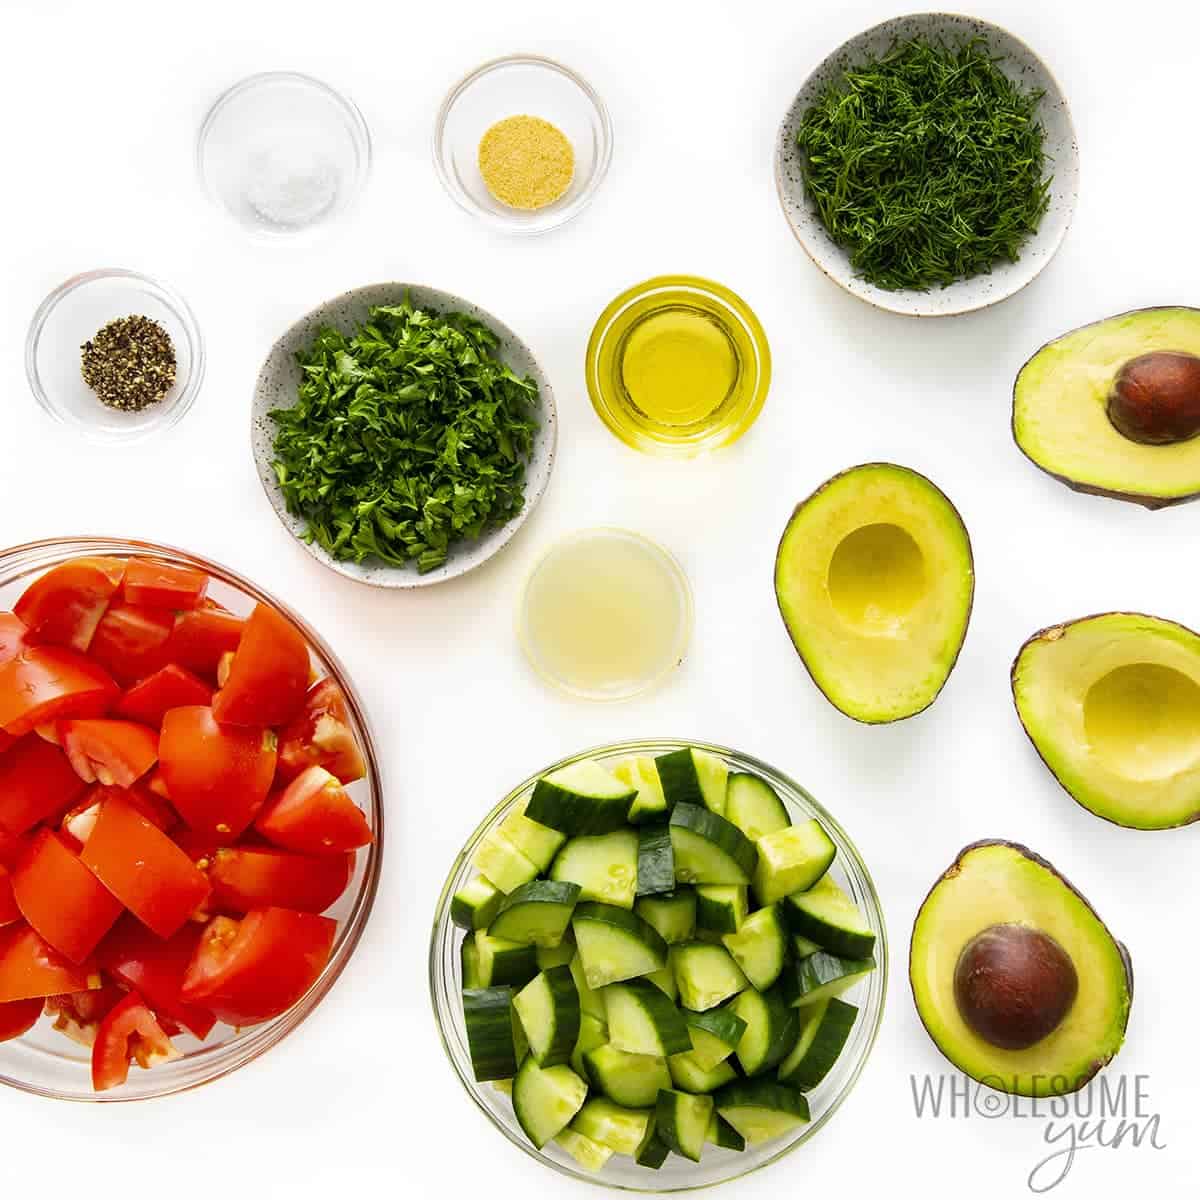 Ingredients to make cucumber tomato and avocado salad